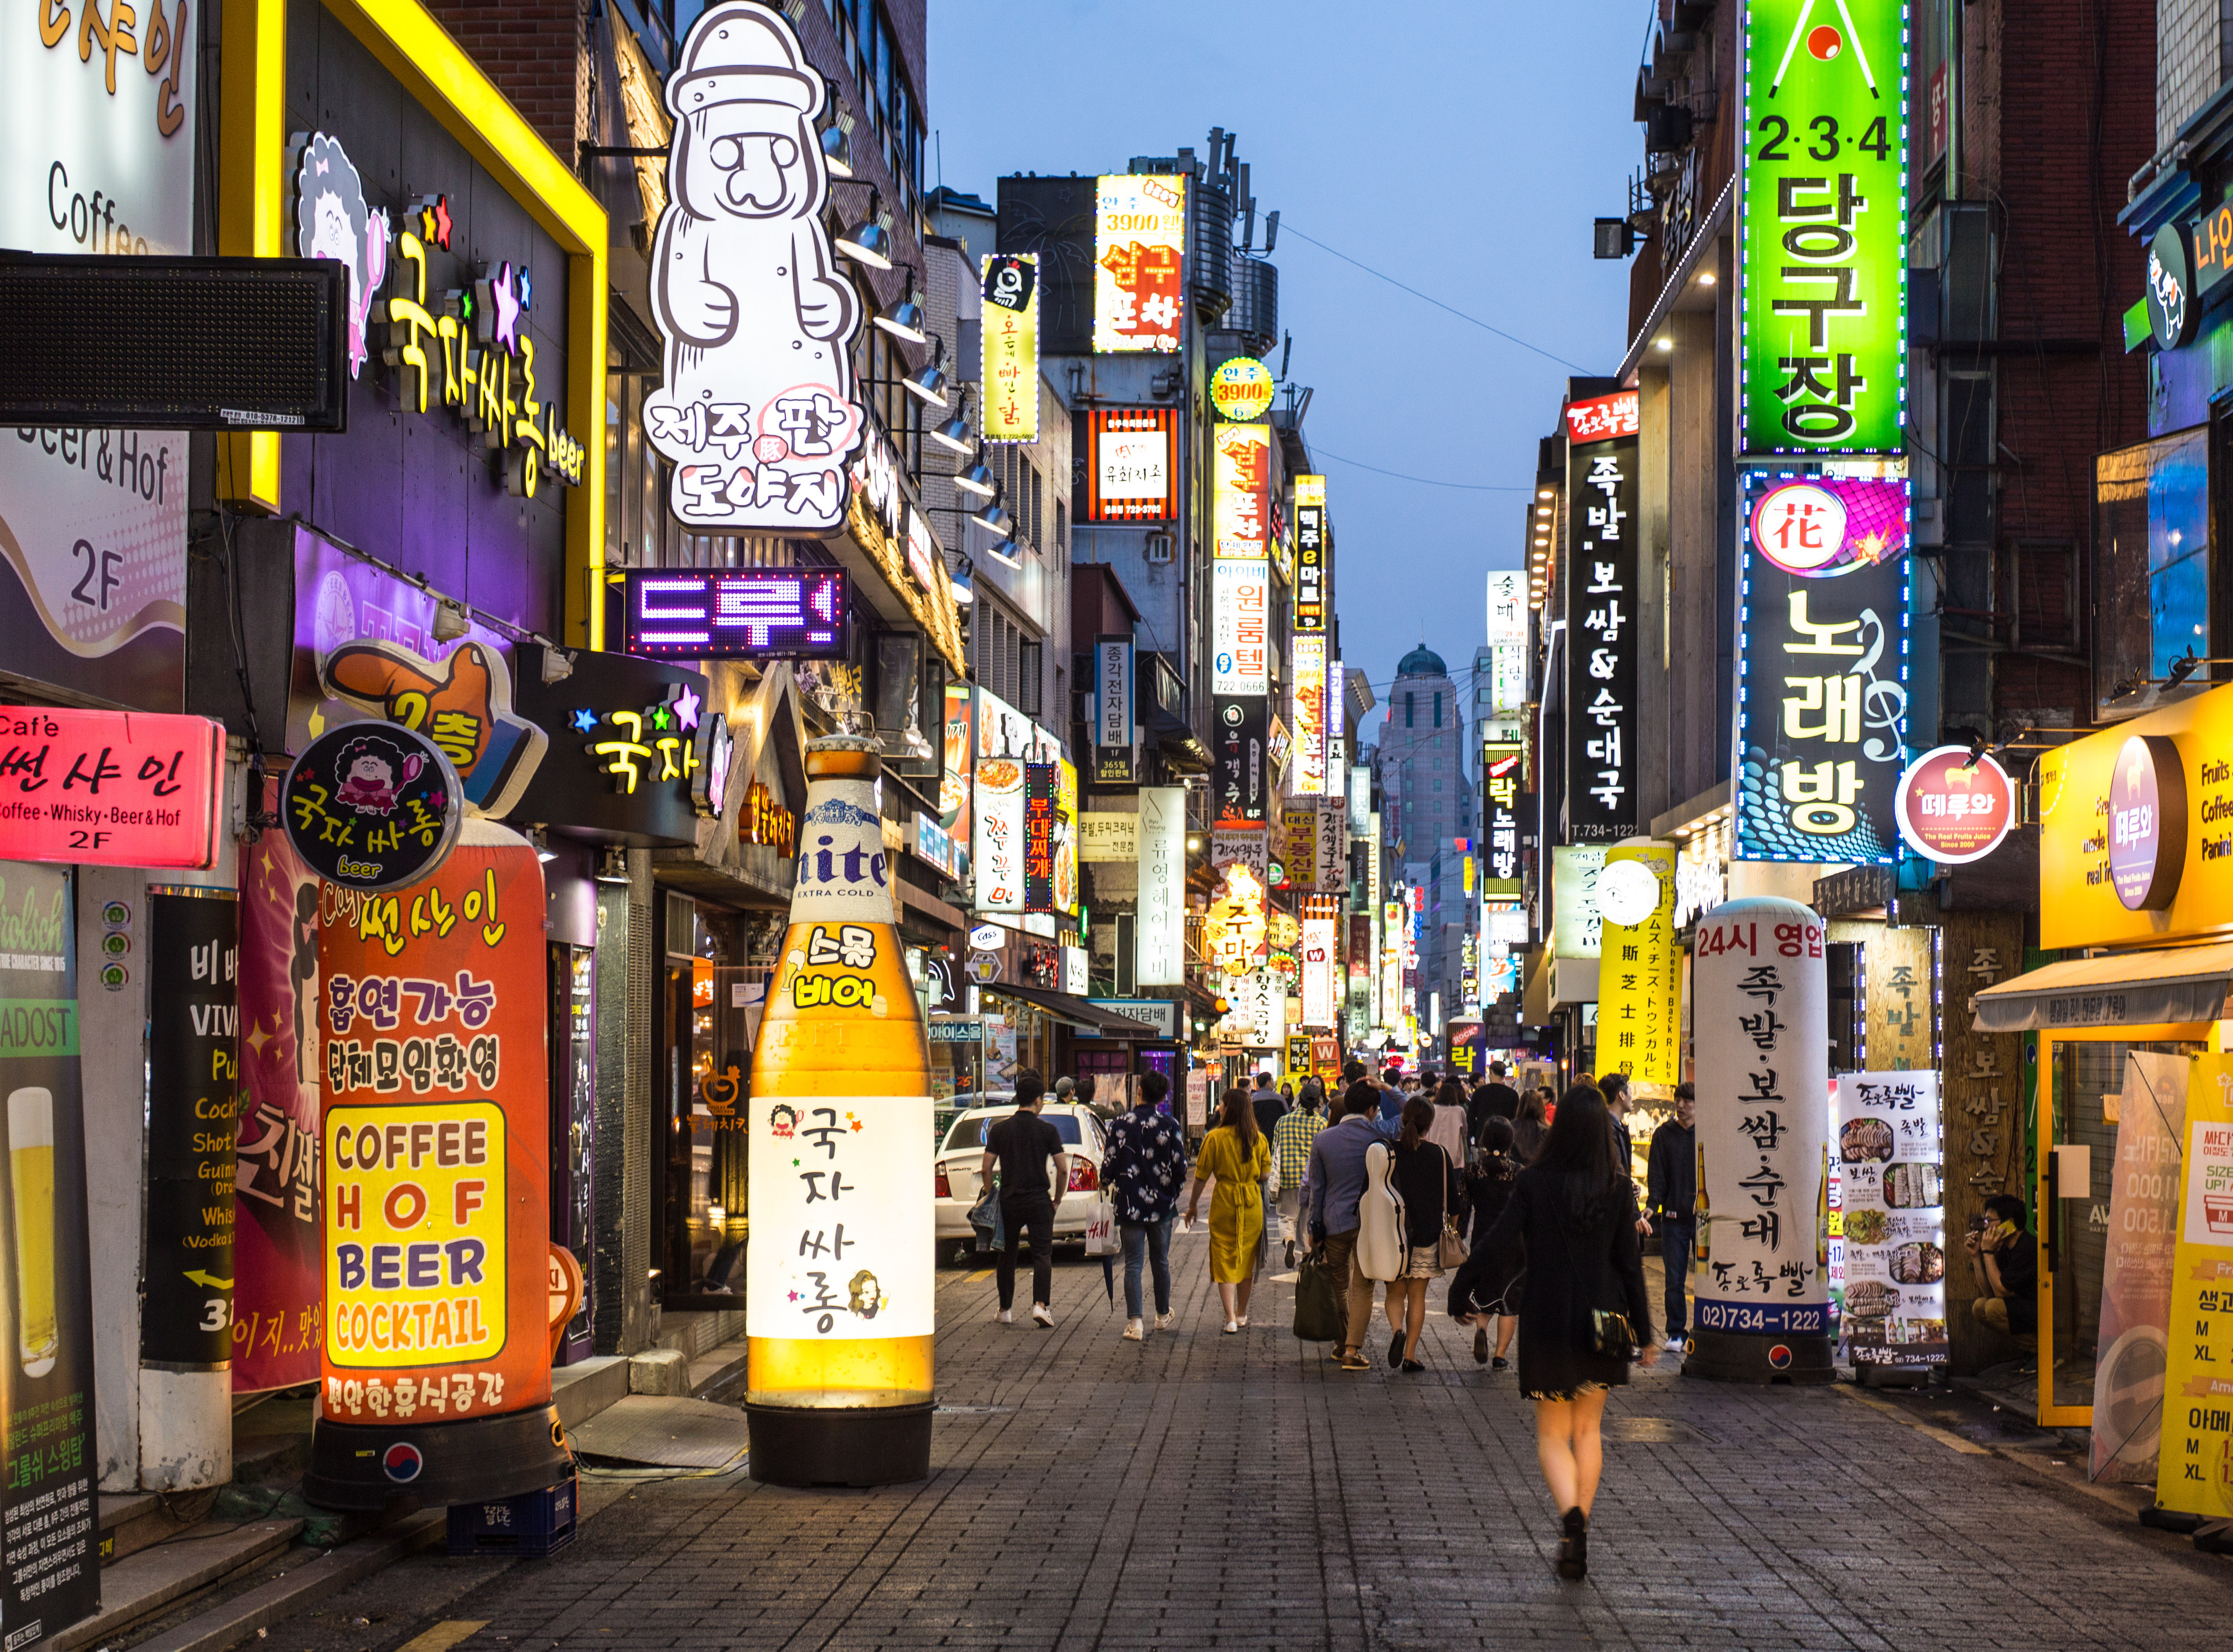 People in the streets of the Insadong entertainment district lined with bars and restaurants in Seoul on May 13, 2017. Photo: Shutterstock